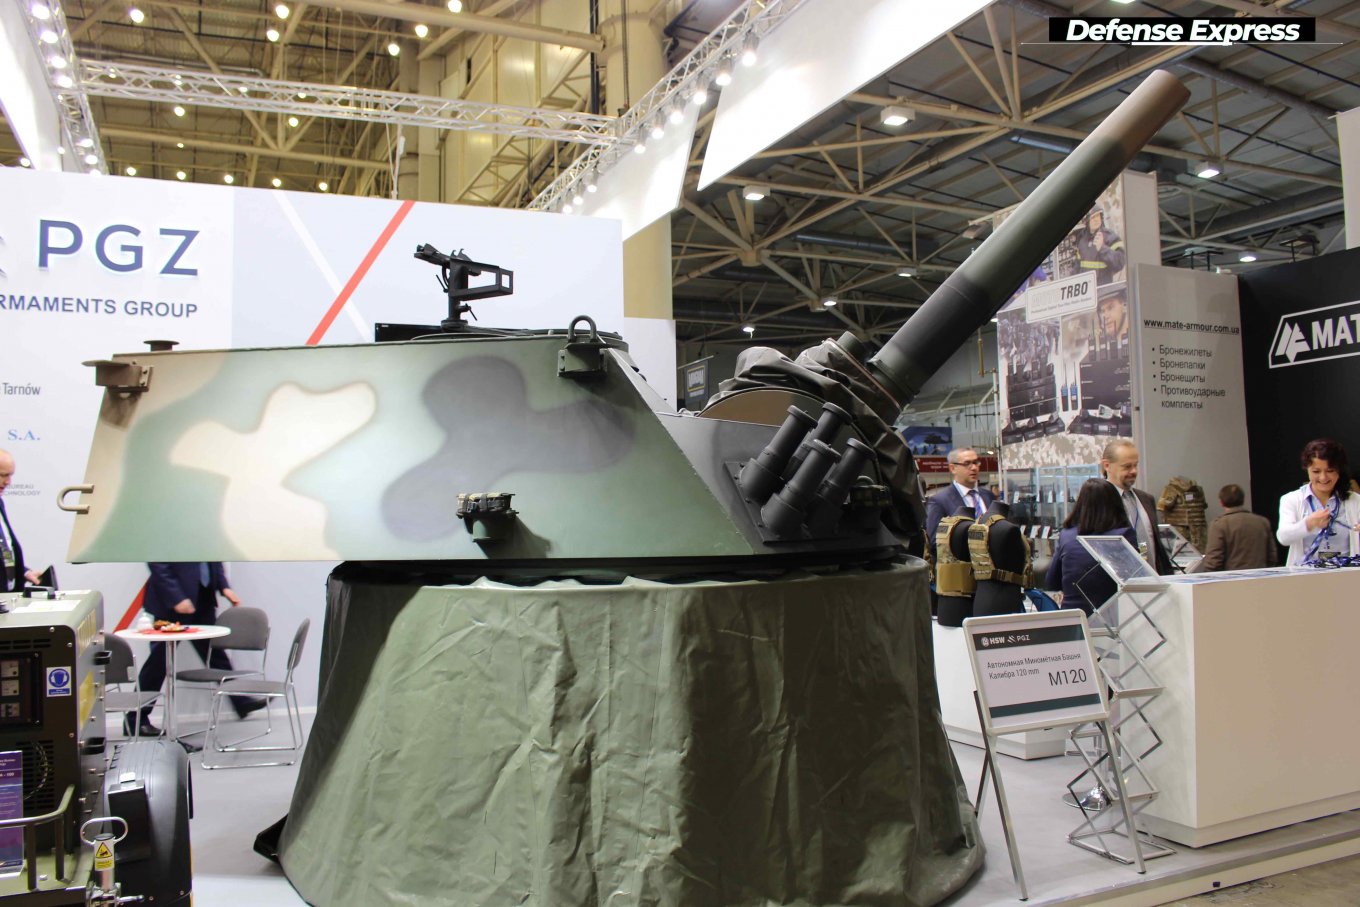 Turret of the 120mm fire unit of the Rak mortar, at an exhibition in Kyiv